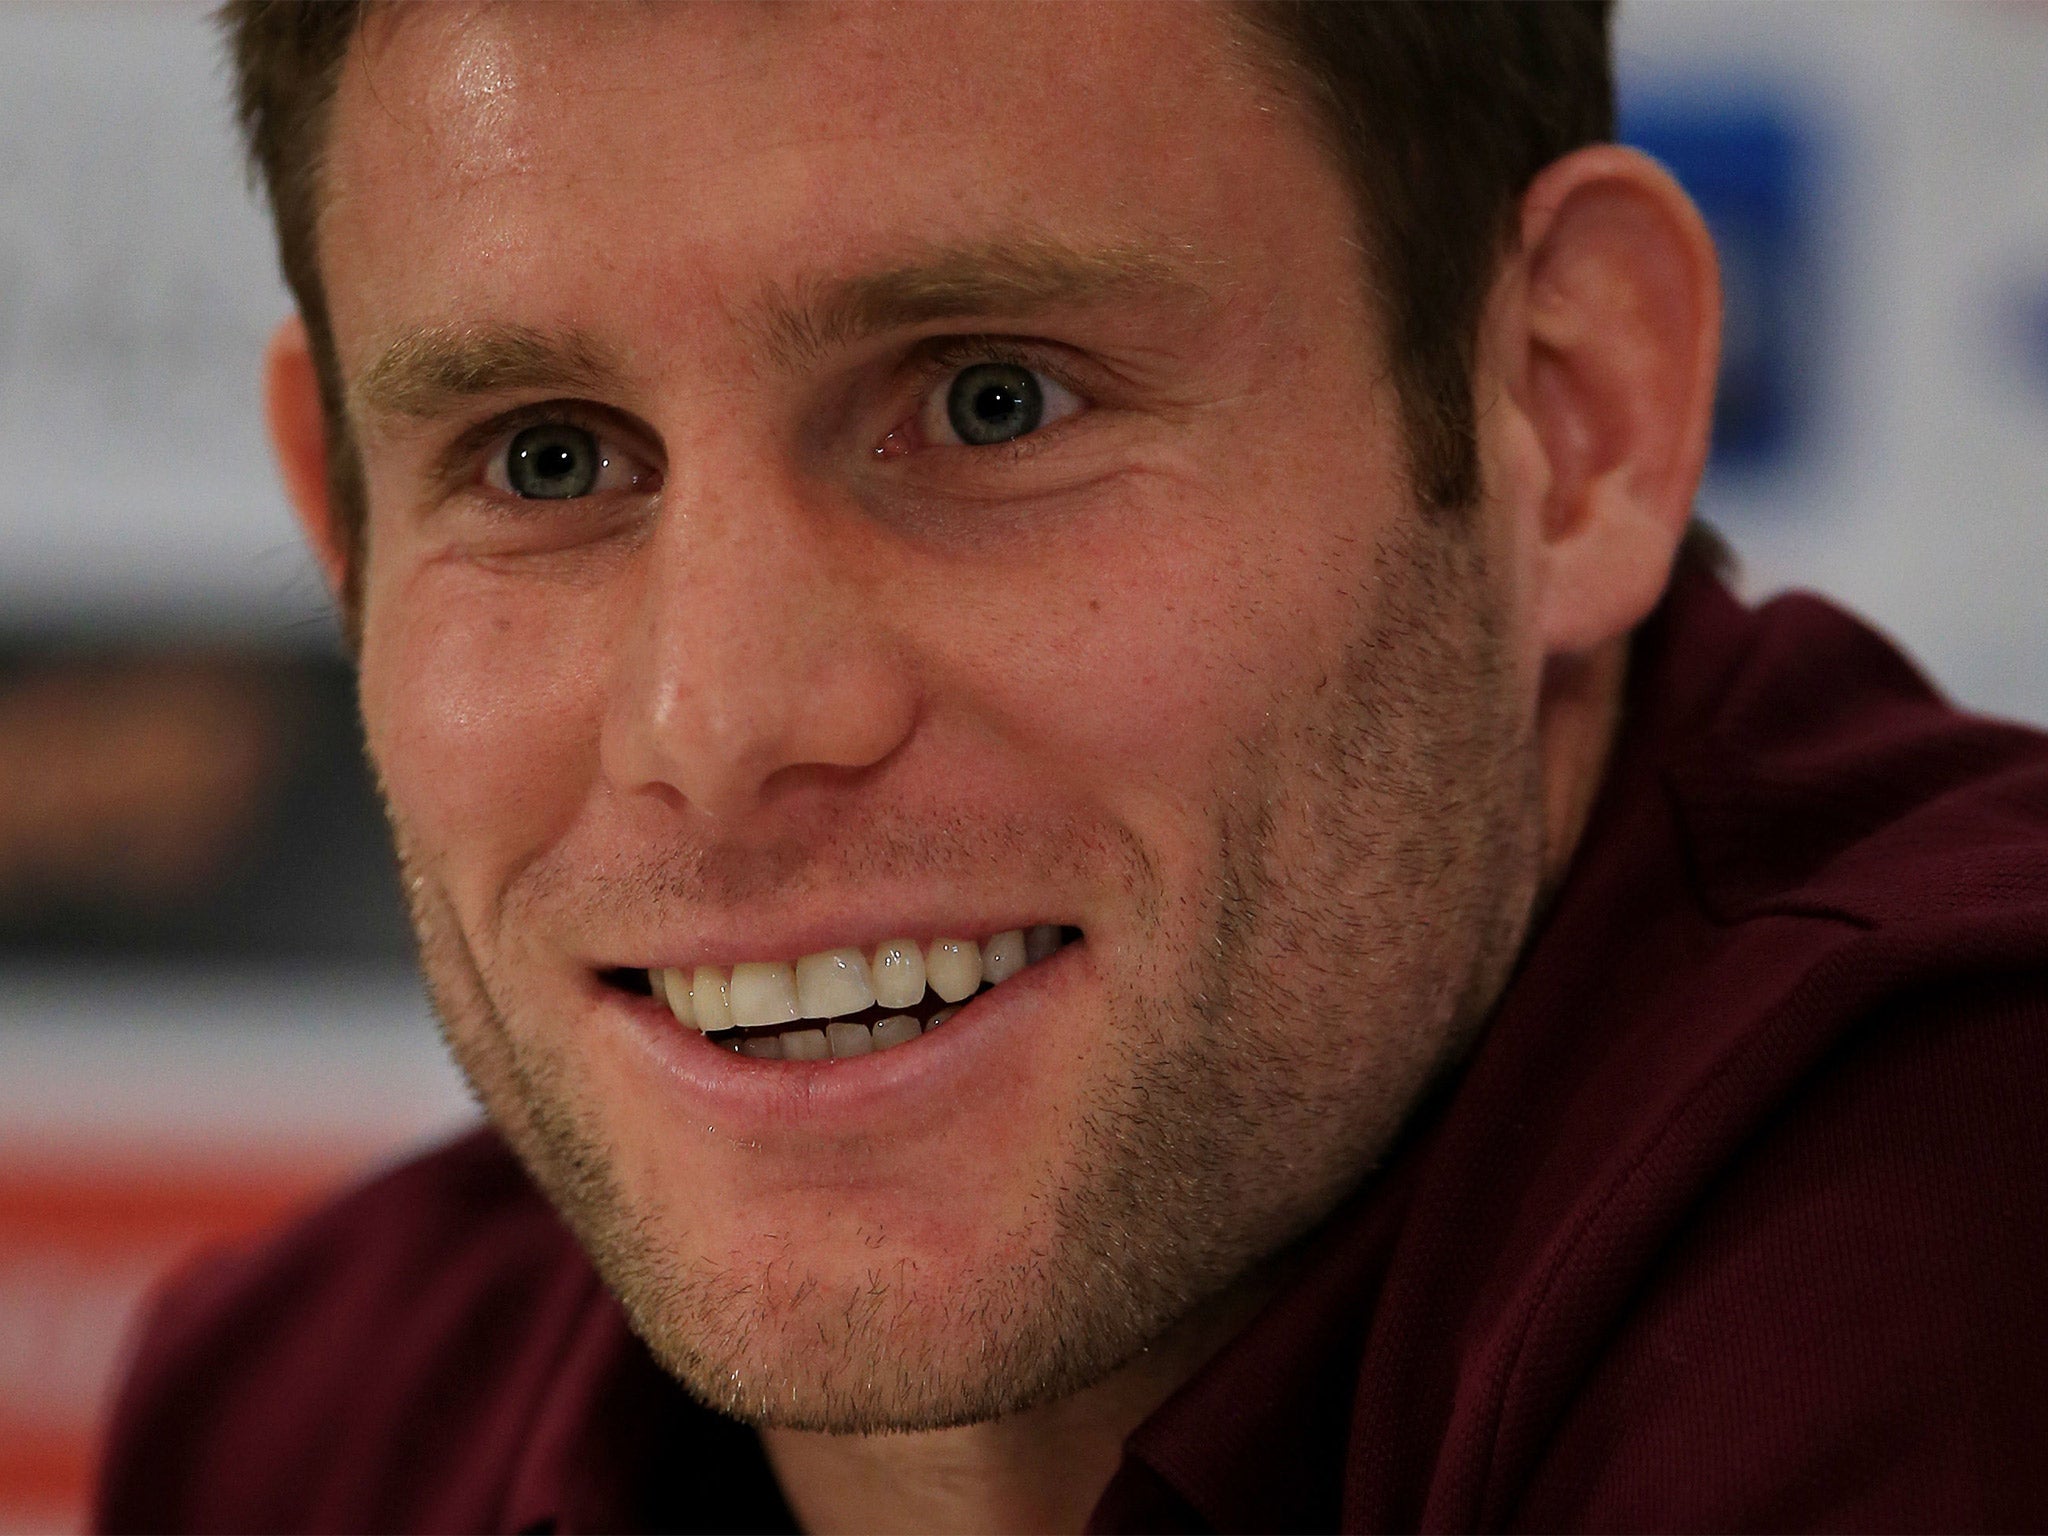 James Milner on dealing with being dropped: 'It is no good for the team if someone sulks or disrupts training'